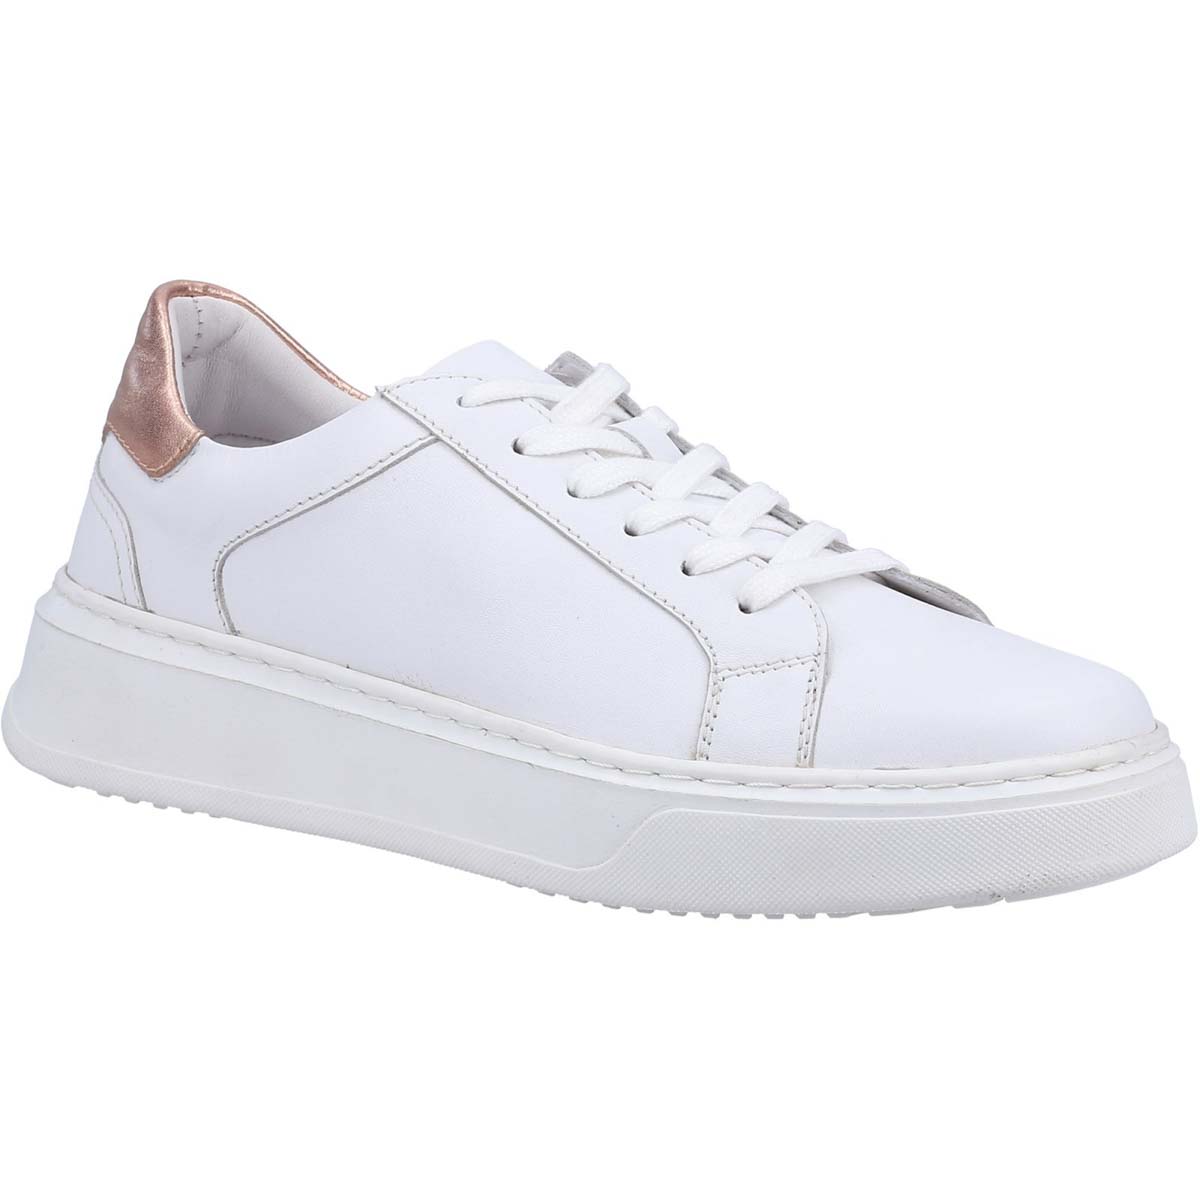 Hush Puppies Camille White Womens trainers 36580-68189 in a Plain Leather in Size 8